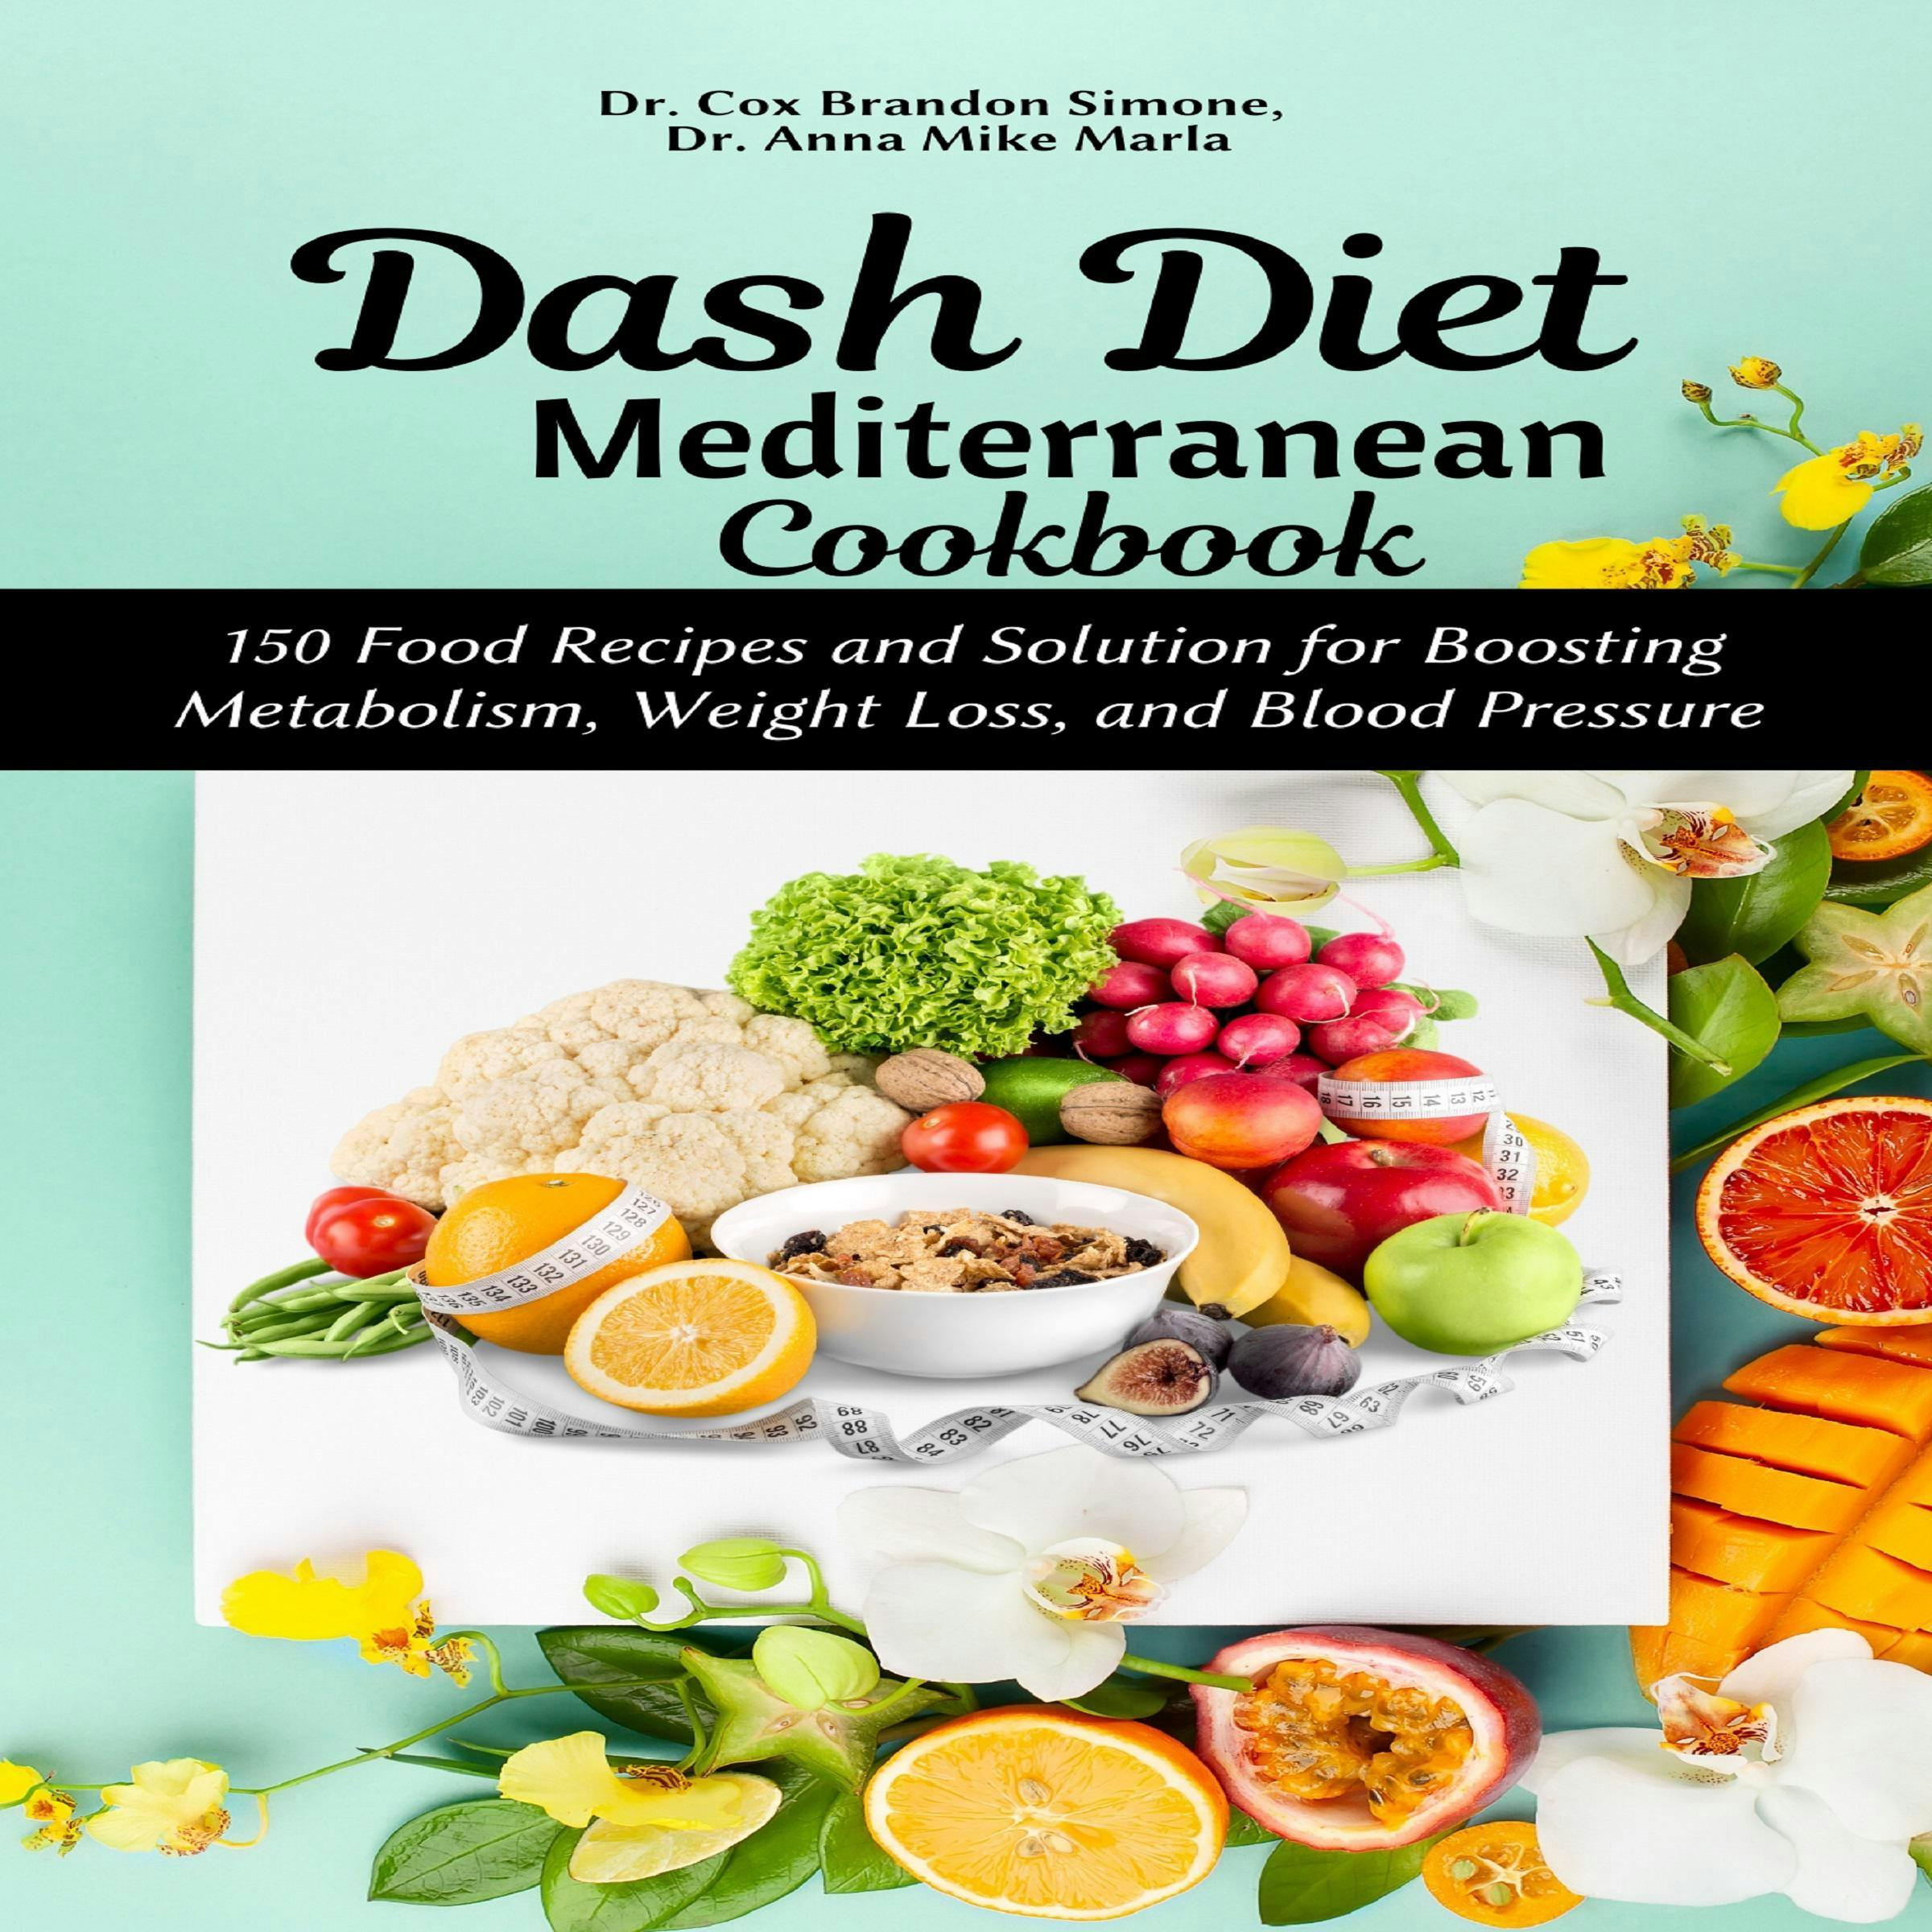 Dash Diet Mediterranean Cookbook: 150 Food Recipes and Solution for Boosting Metabolism, Weight Loss, and Blood Pressure - Dr. Anna Mike Marla, Dr. Cox Brandon Simone